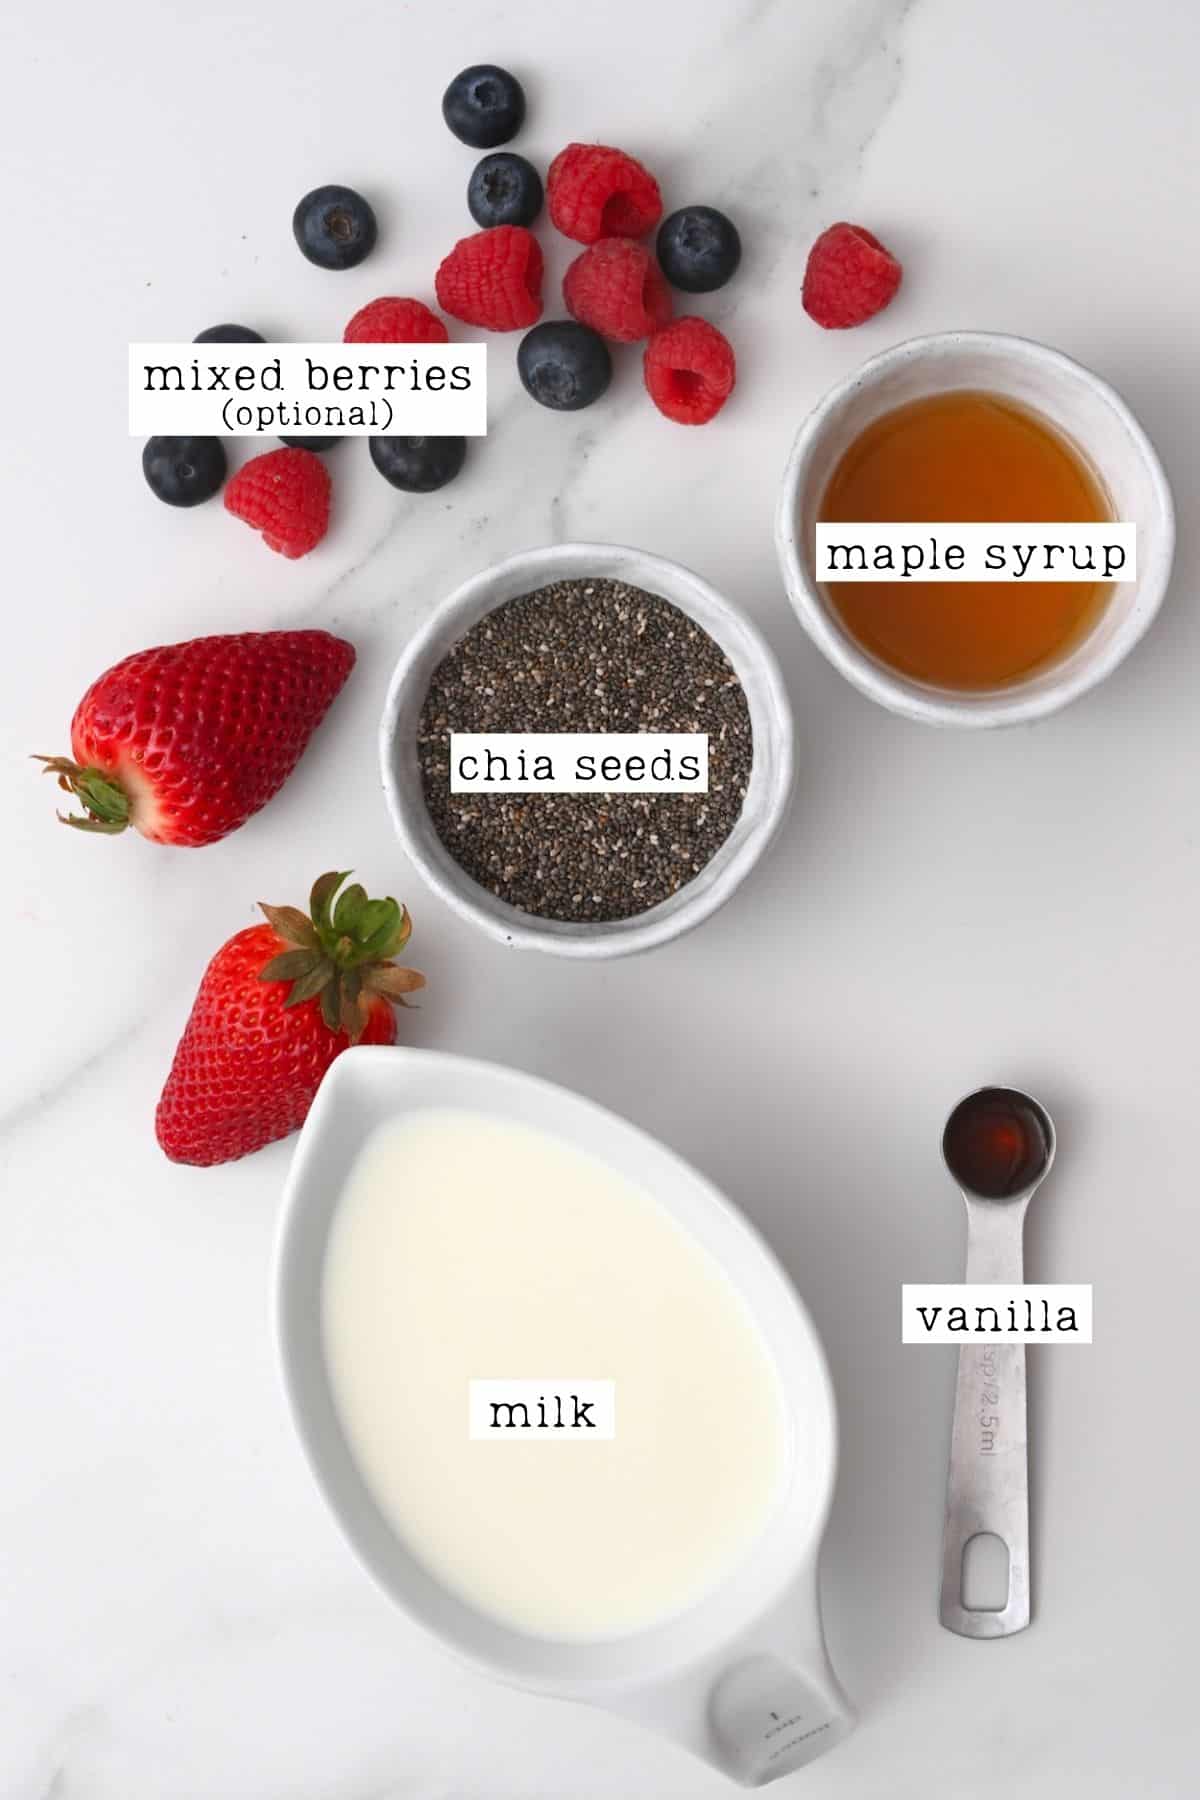 Ingredients for chia seeds